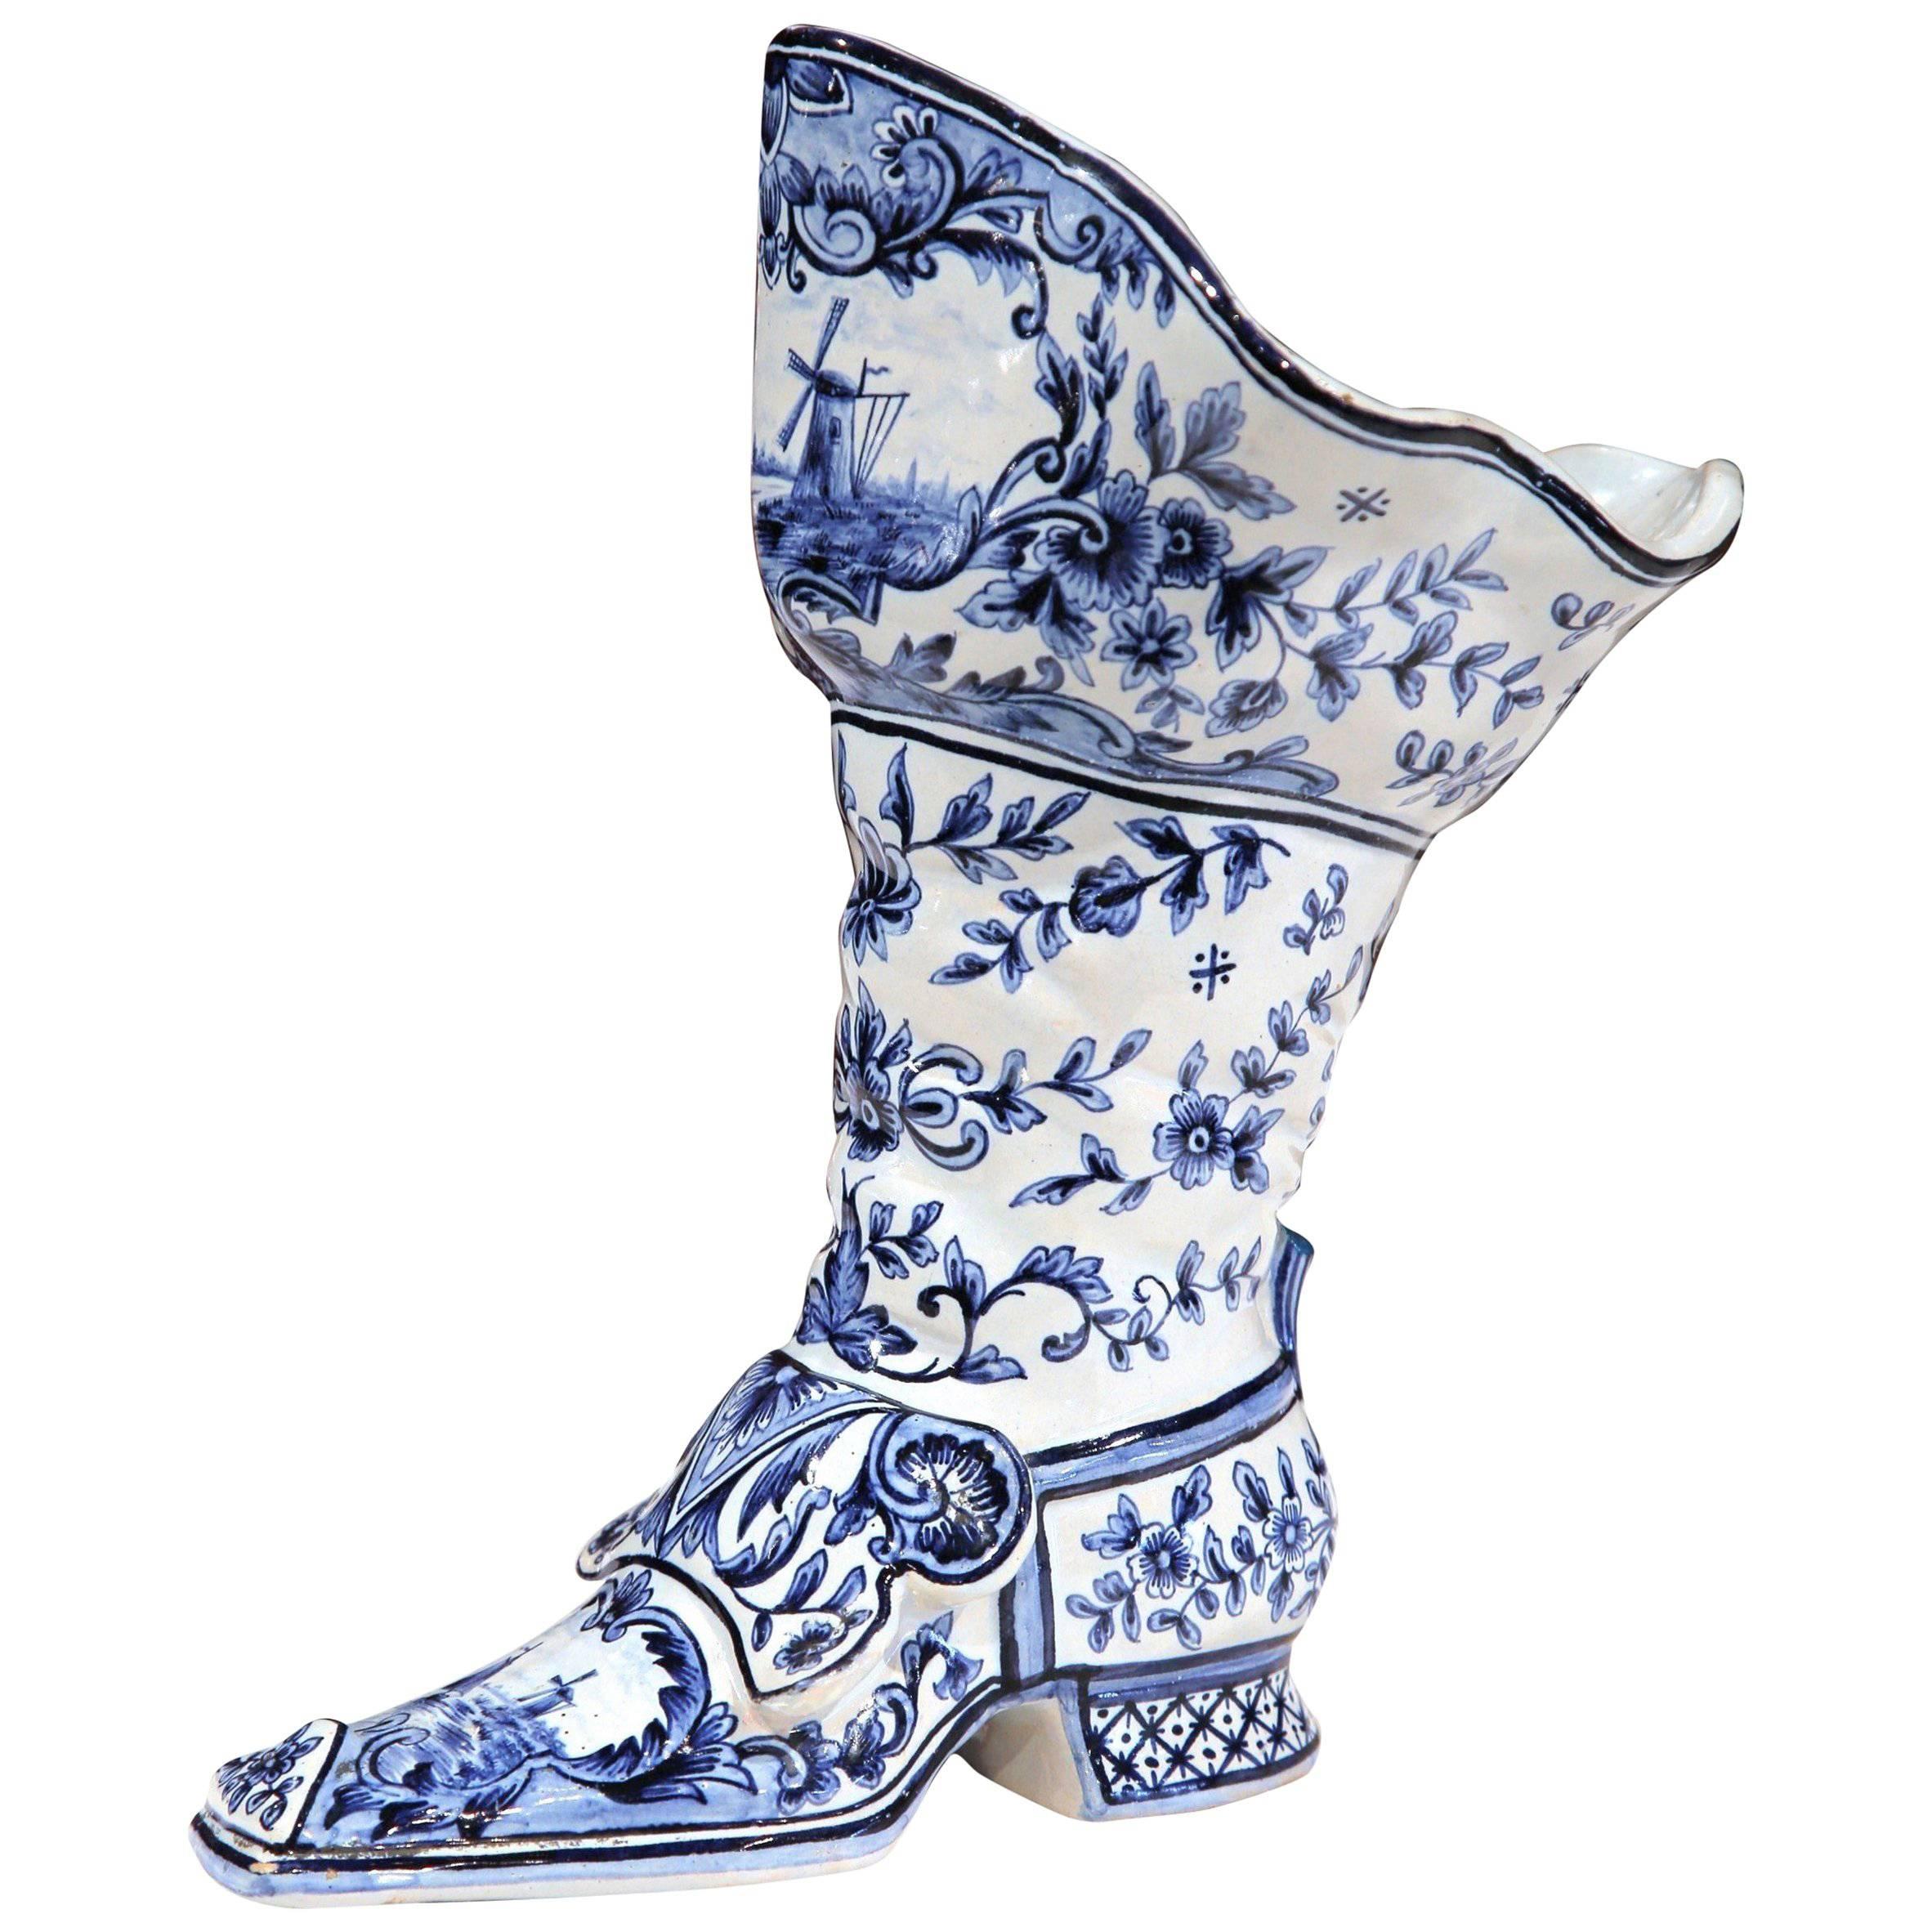 Early 20th Century Hand-Painted Blue and White Vase Shaped as a Boot